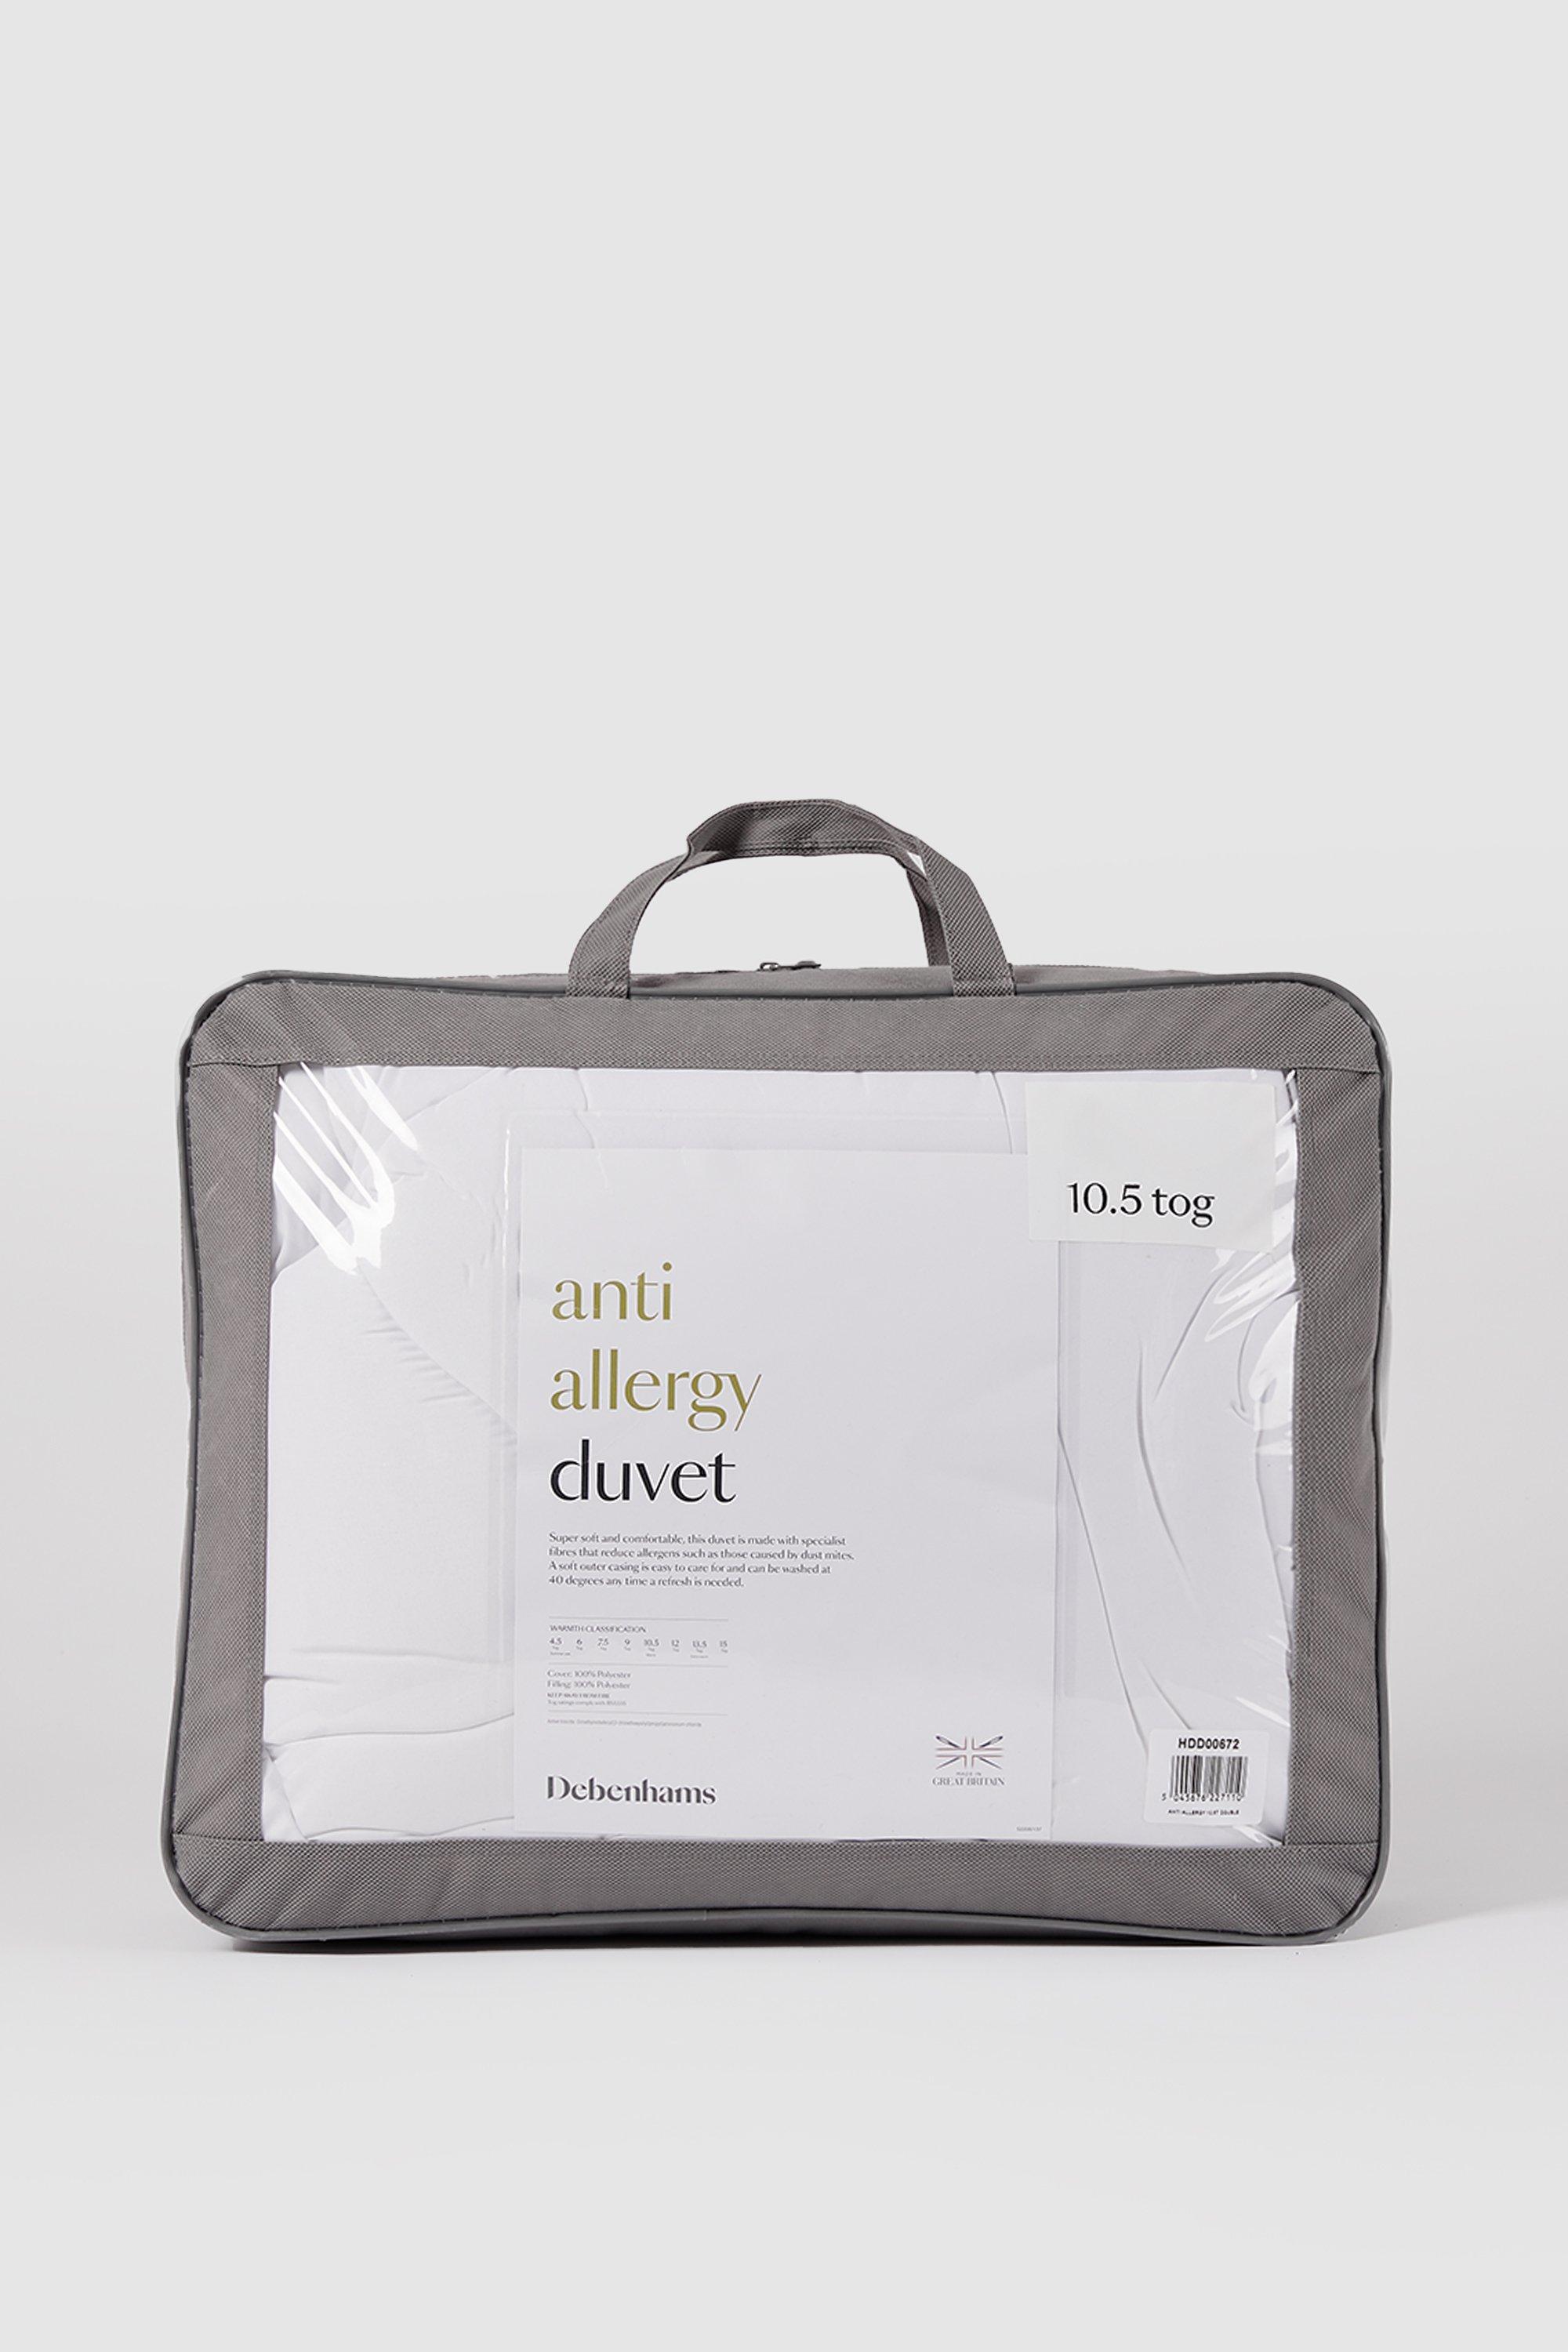 Picture of Anti Allergy Double Duvet 10.5tog